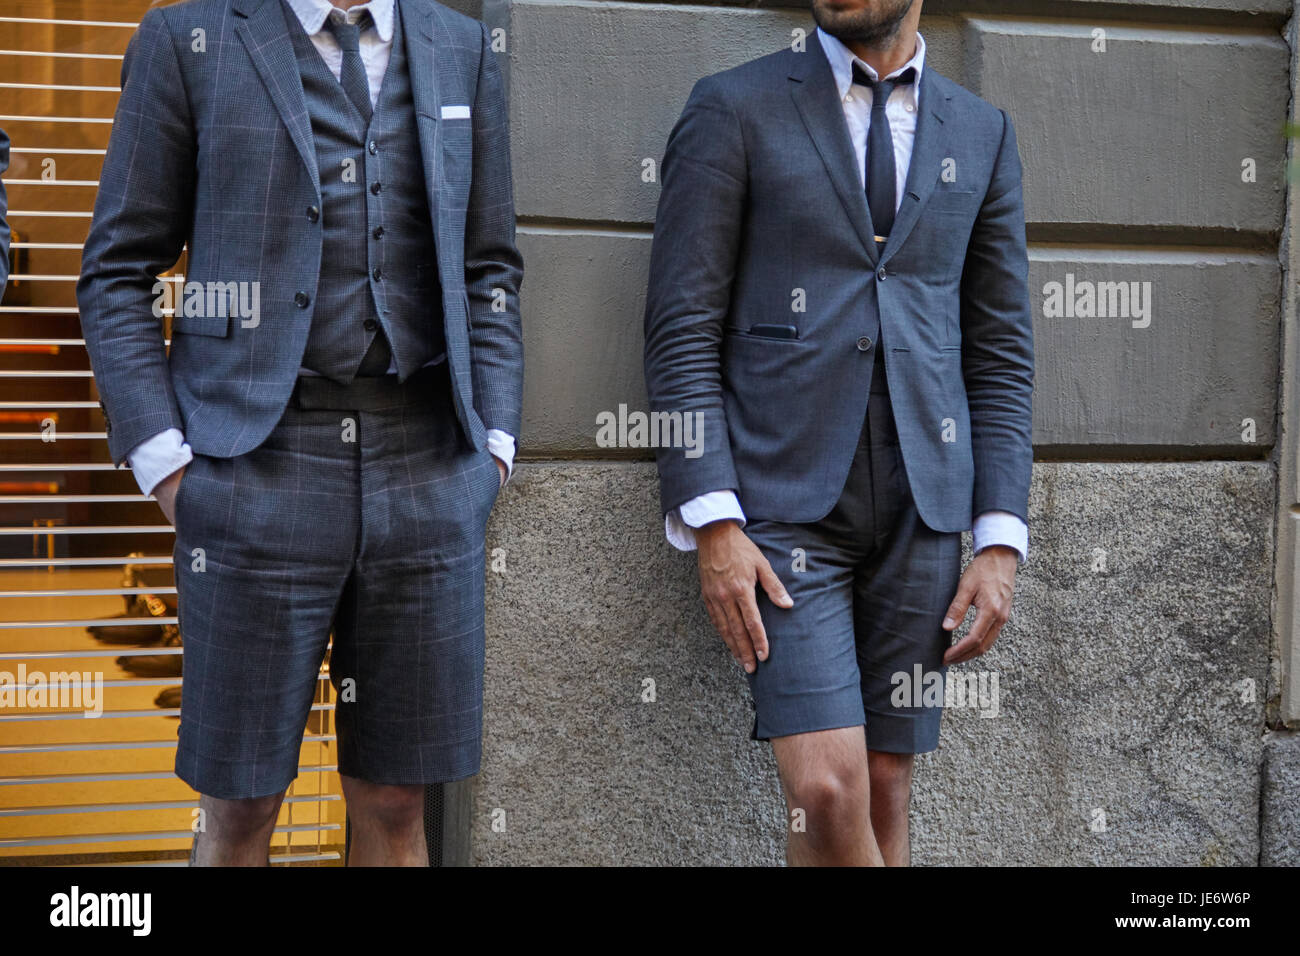 MILAN - JUNE 17: Men with gray suit and short trousers before Versace fashion show, Milan Fashion Week street style on June 17, 2017 in Milan. Stock Photo